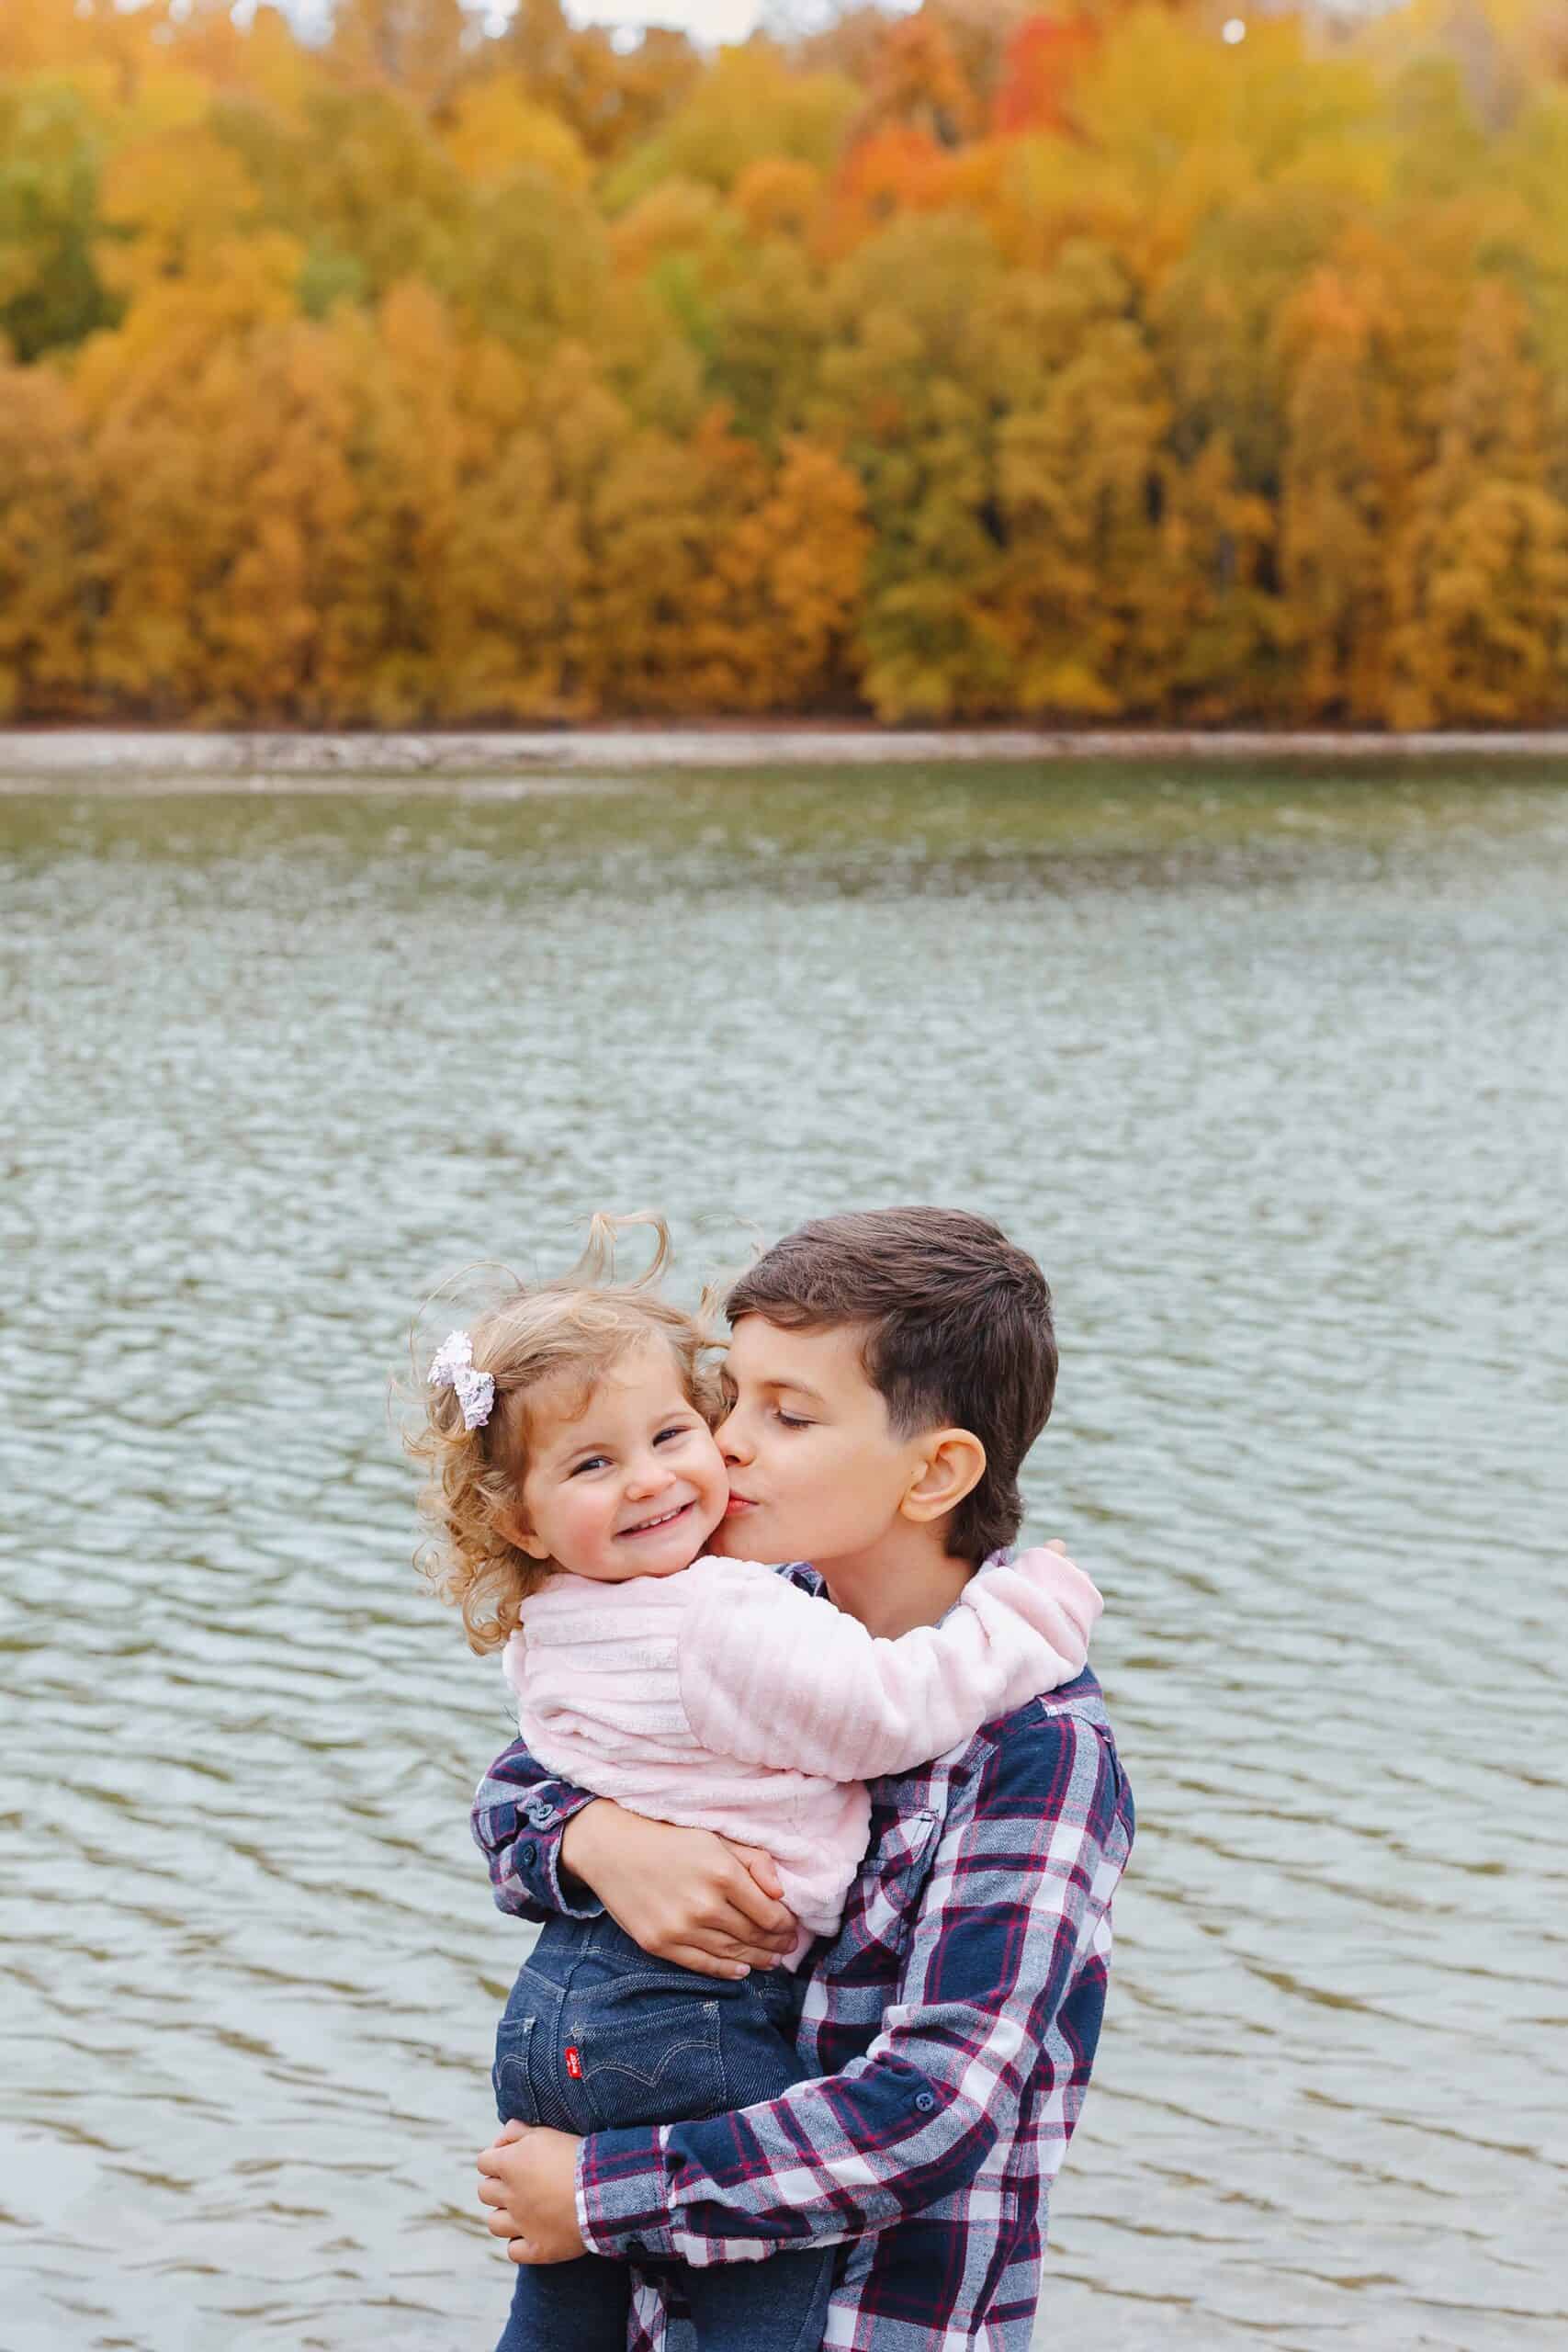 A young boy holds and kisses his toddler baby sister while standing along a lake